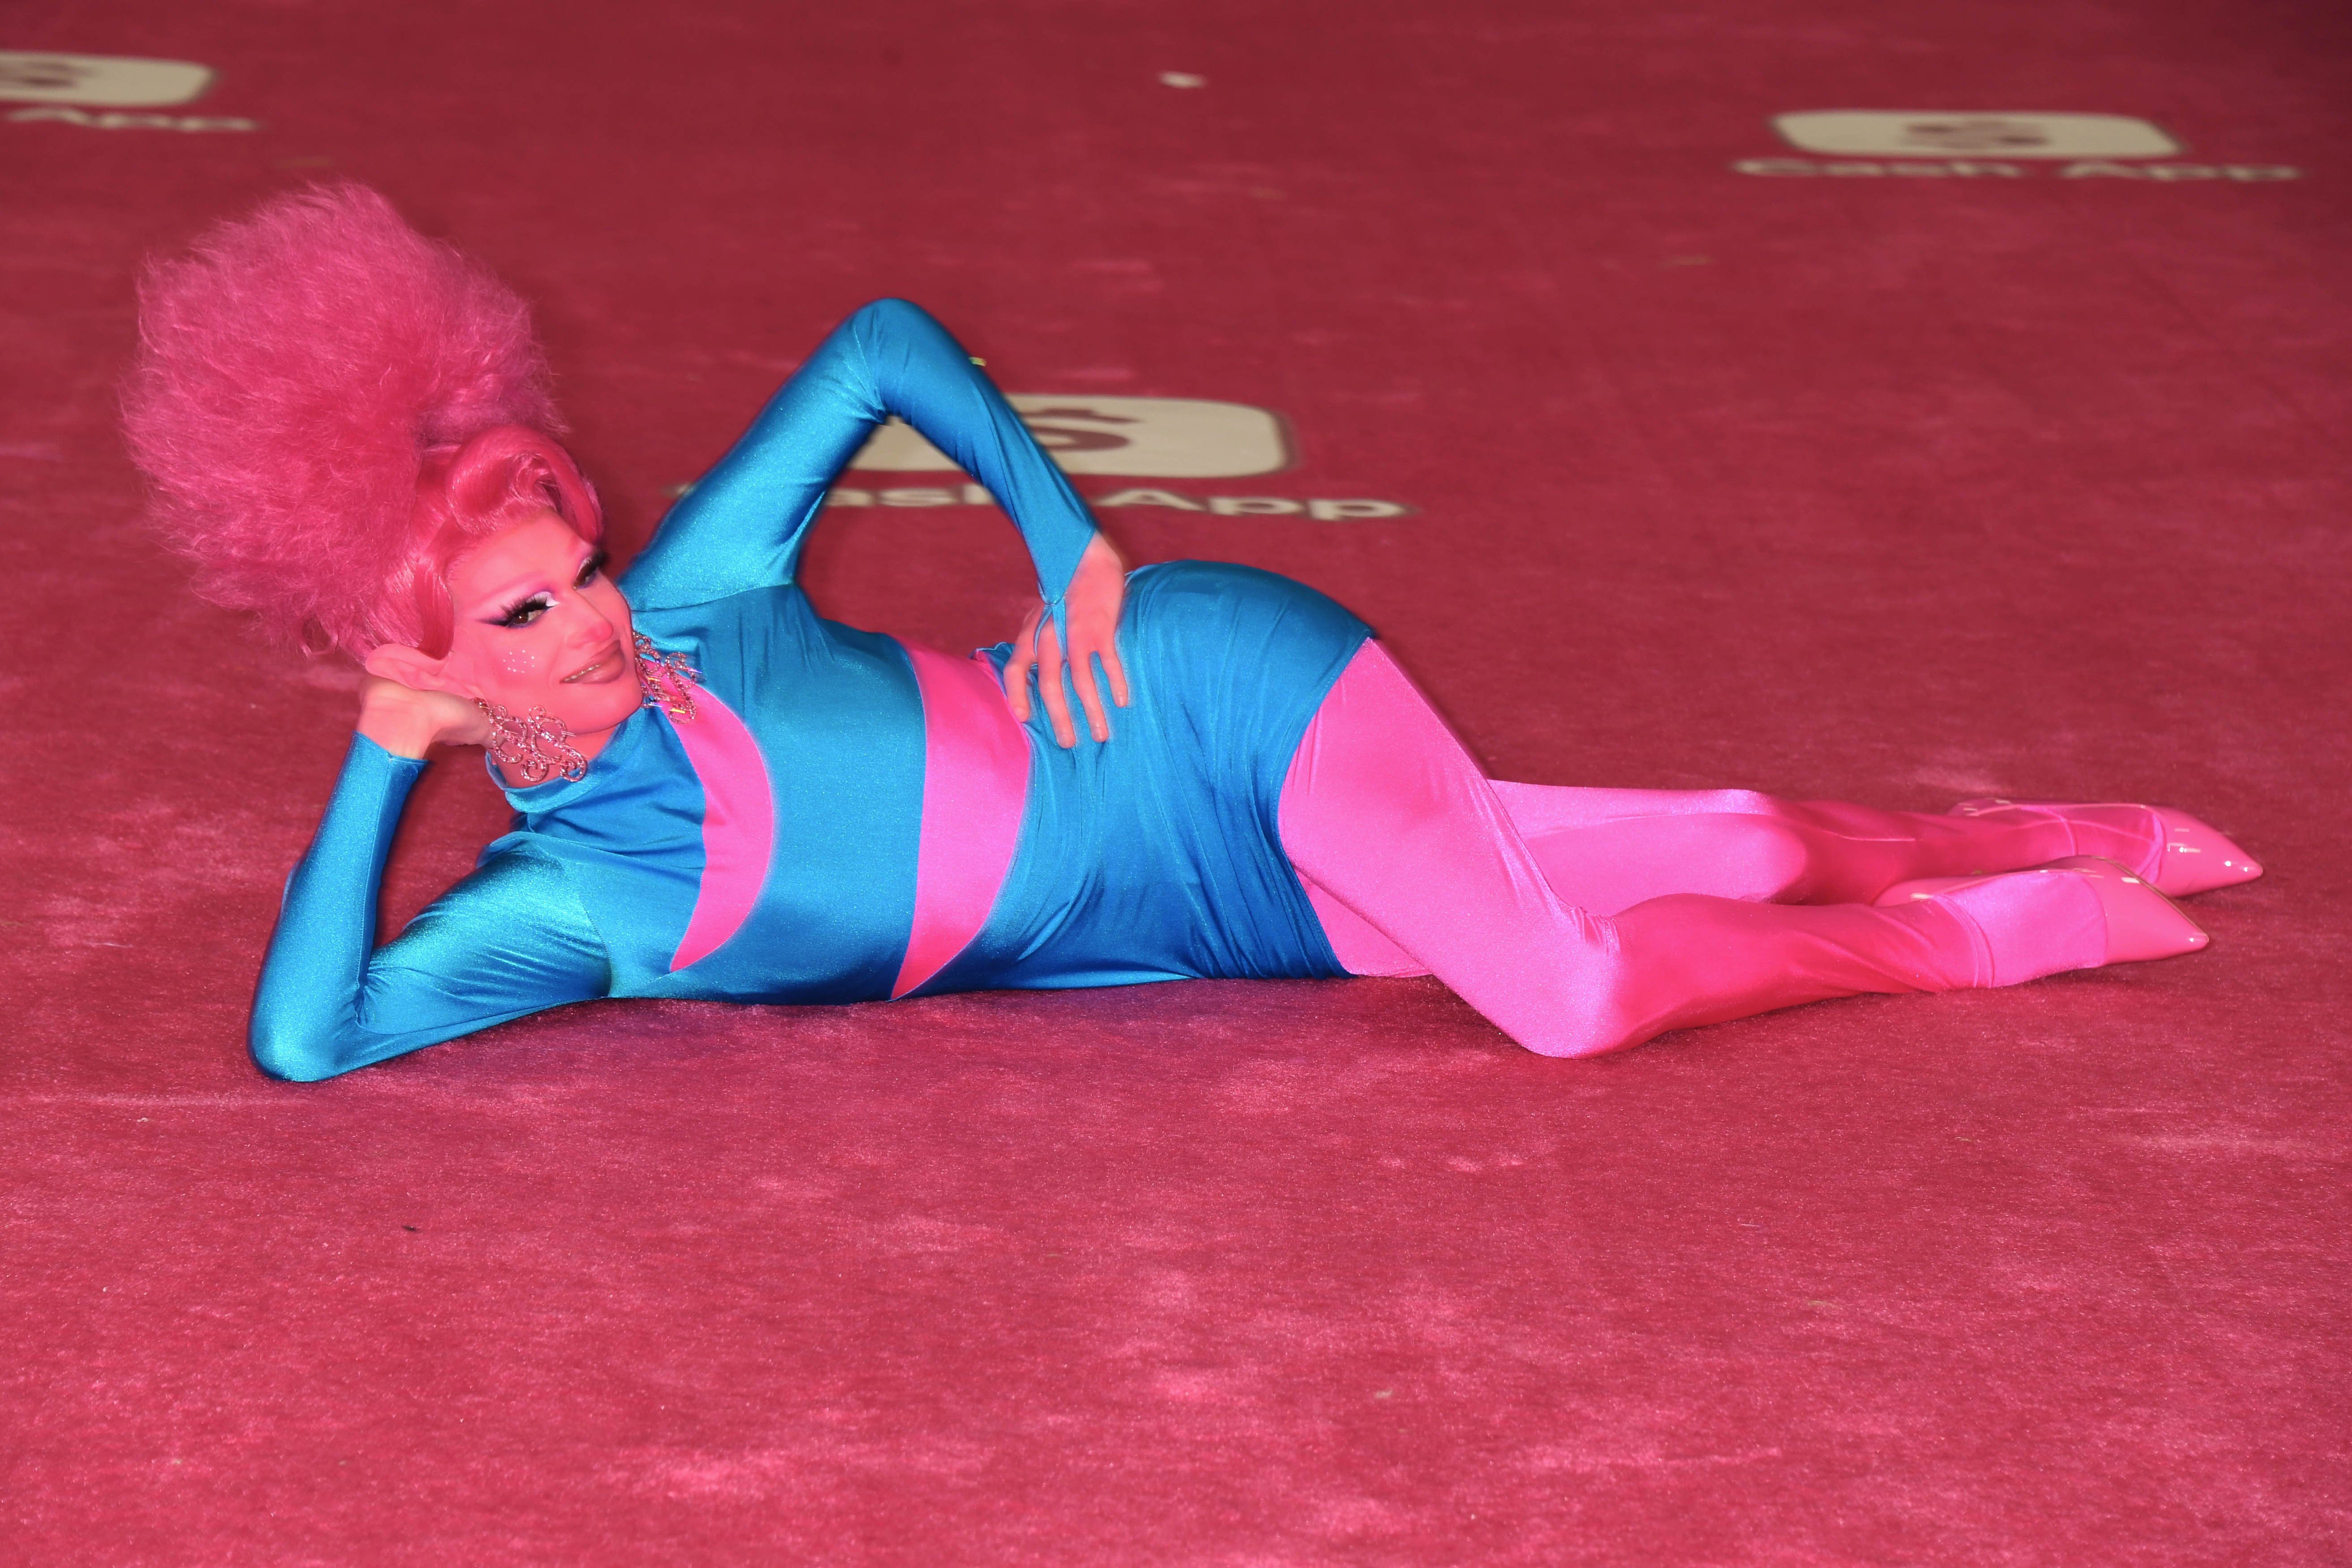 
Princess Poppy Officially Retires With Final Interview at DragCon 2023
